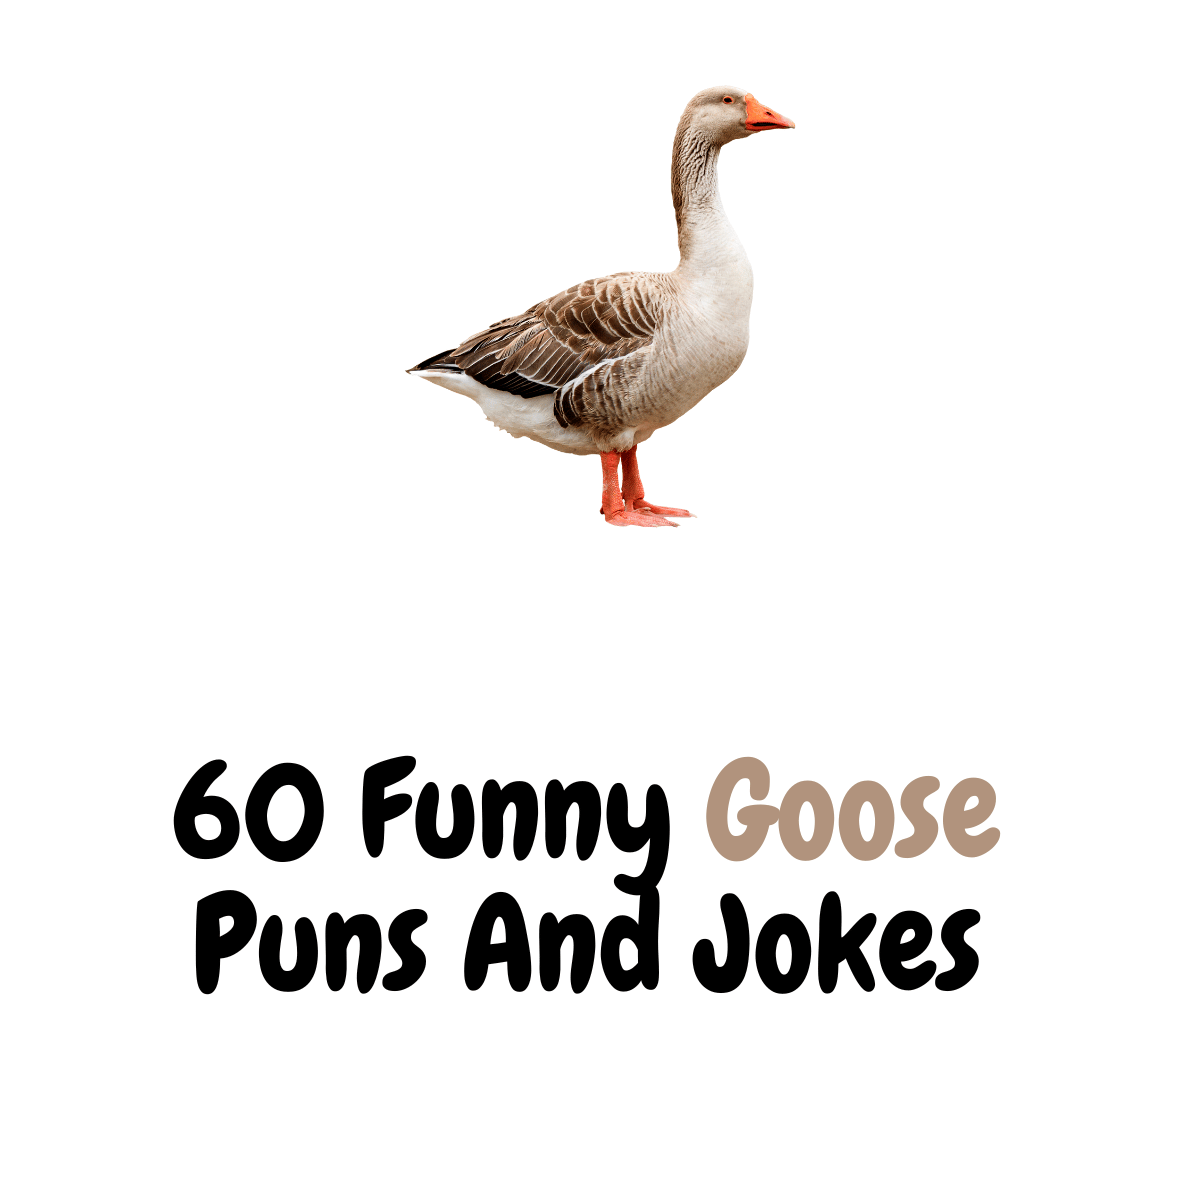 Funny Goose Puns And Jokes